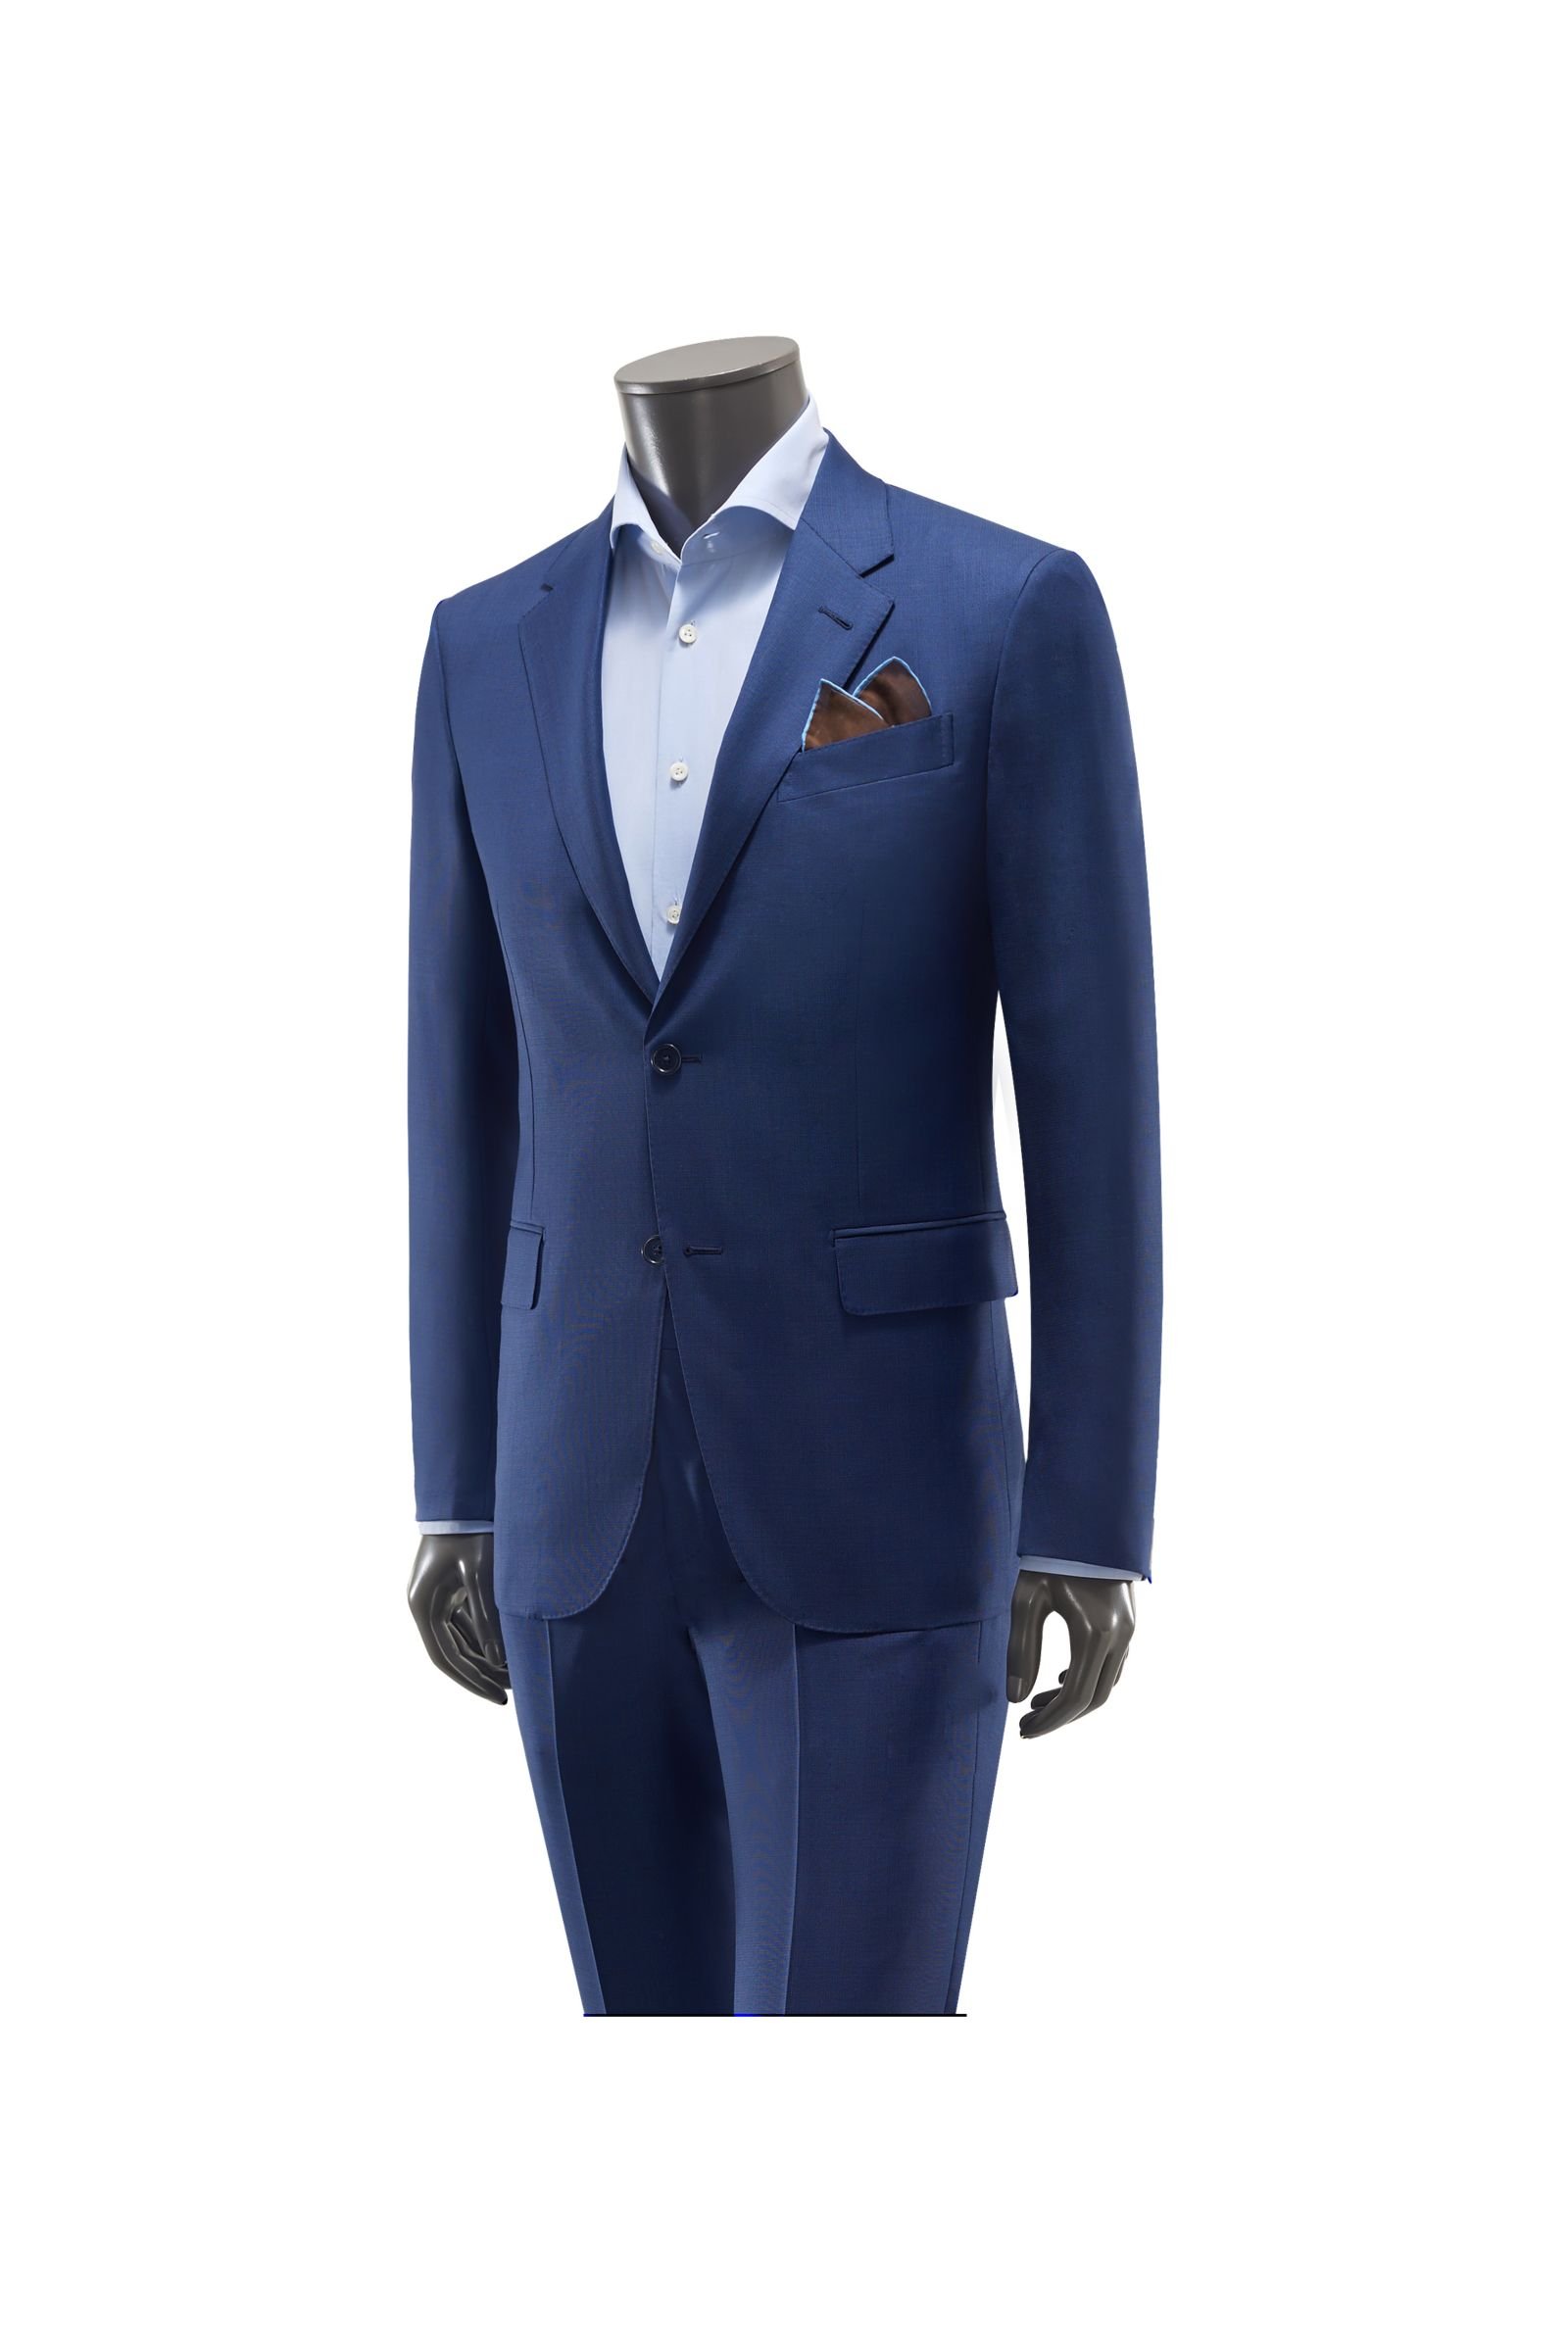 Suit 'Milano Easy Slim Fit' navy patterned